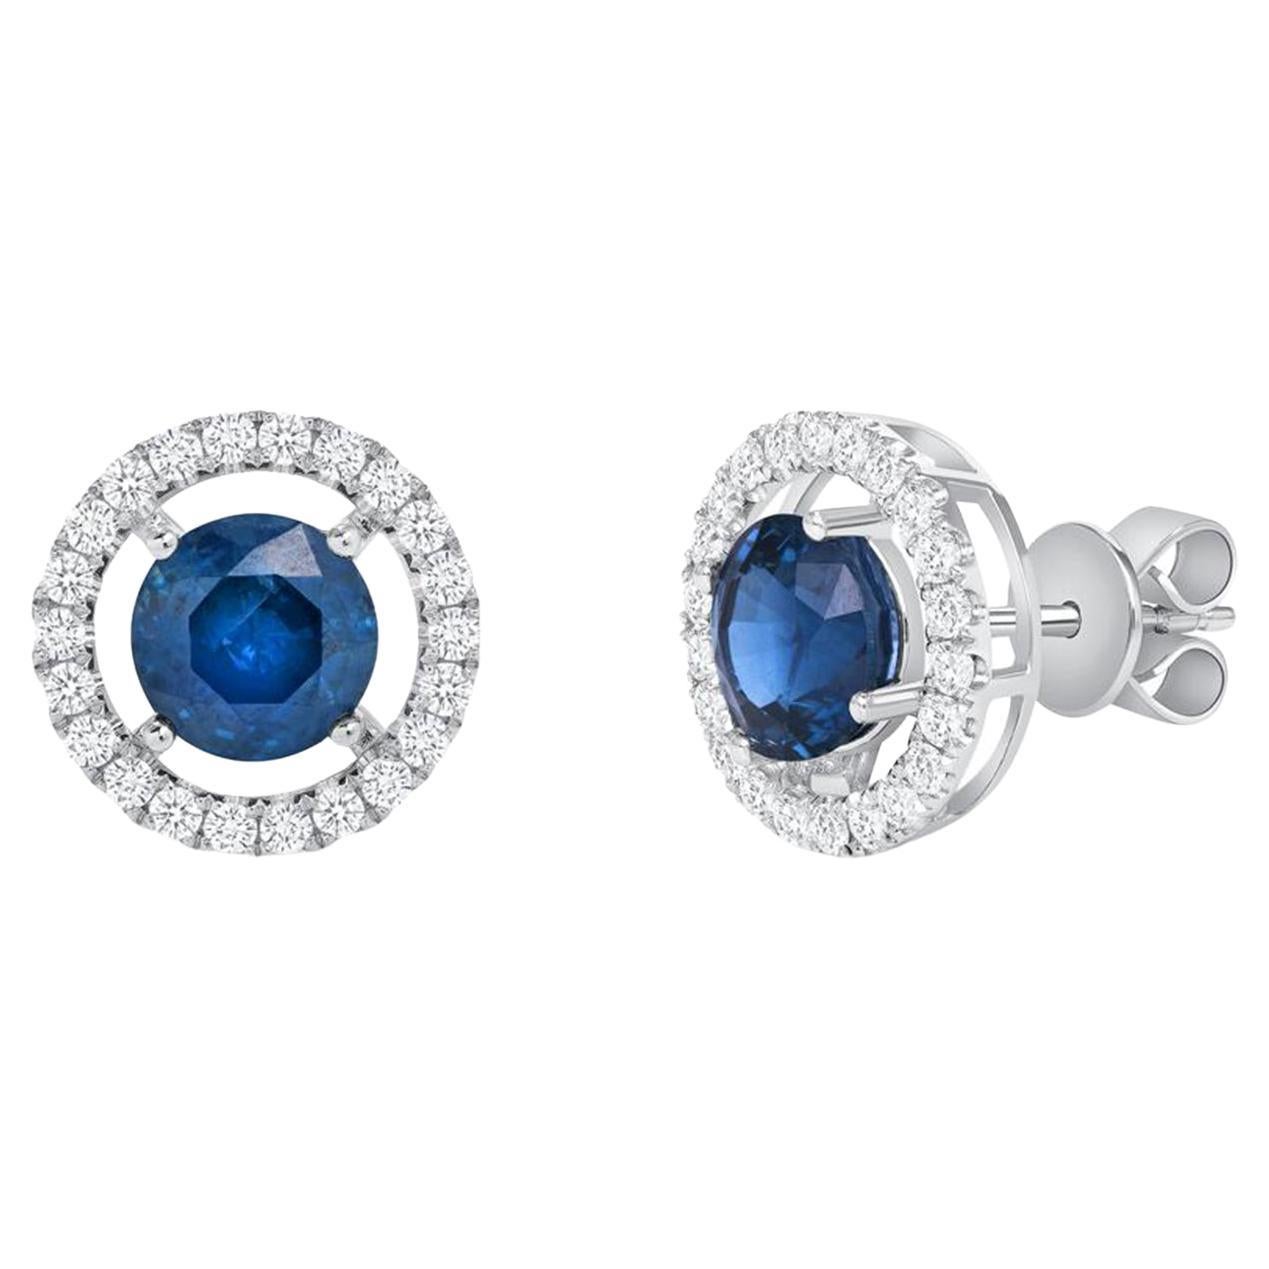 1.89 Ct Natural Blue Sapphire 0.44 Ct Diamonds 14K White Gold Stud Earrings For Sale